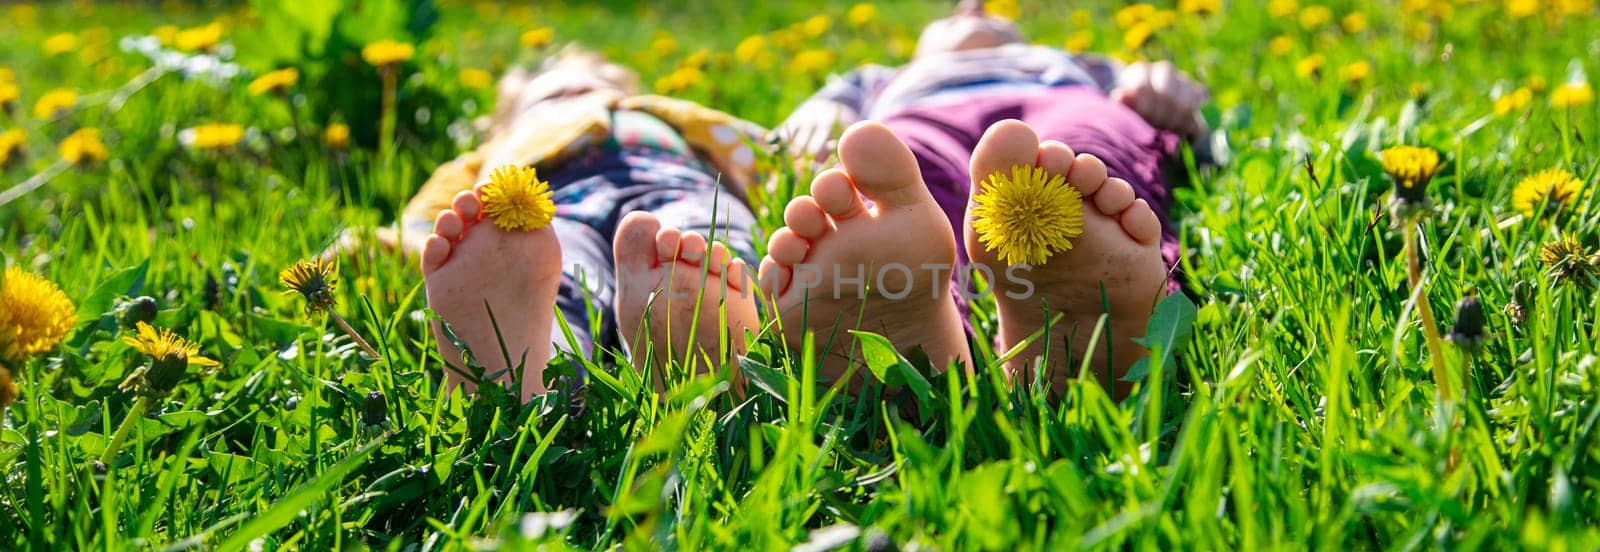 Child feet on the grass in the spring dandelions garden. Selective focus. by yanadjana